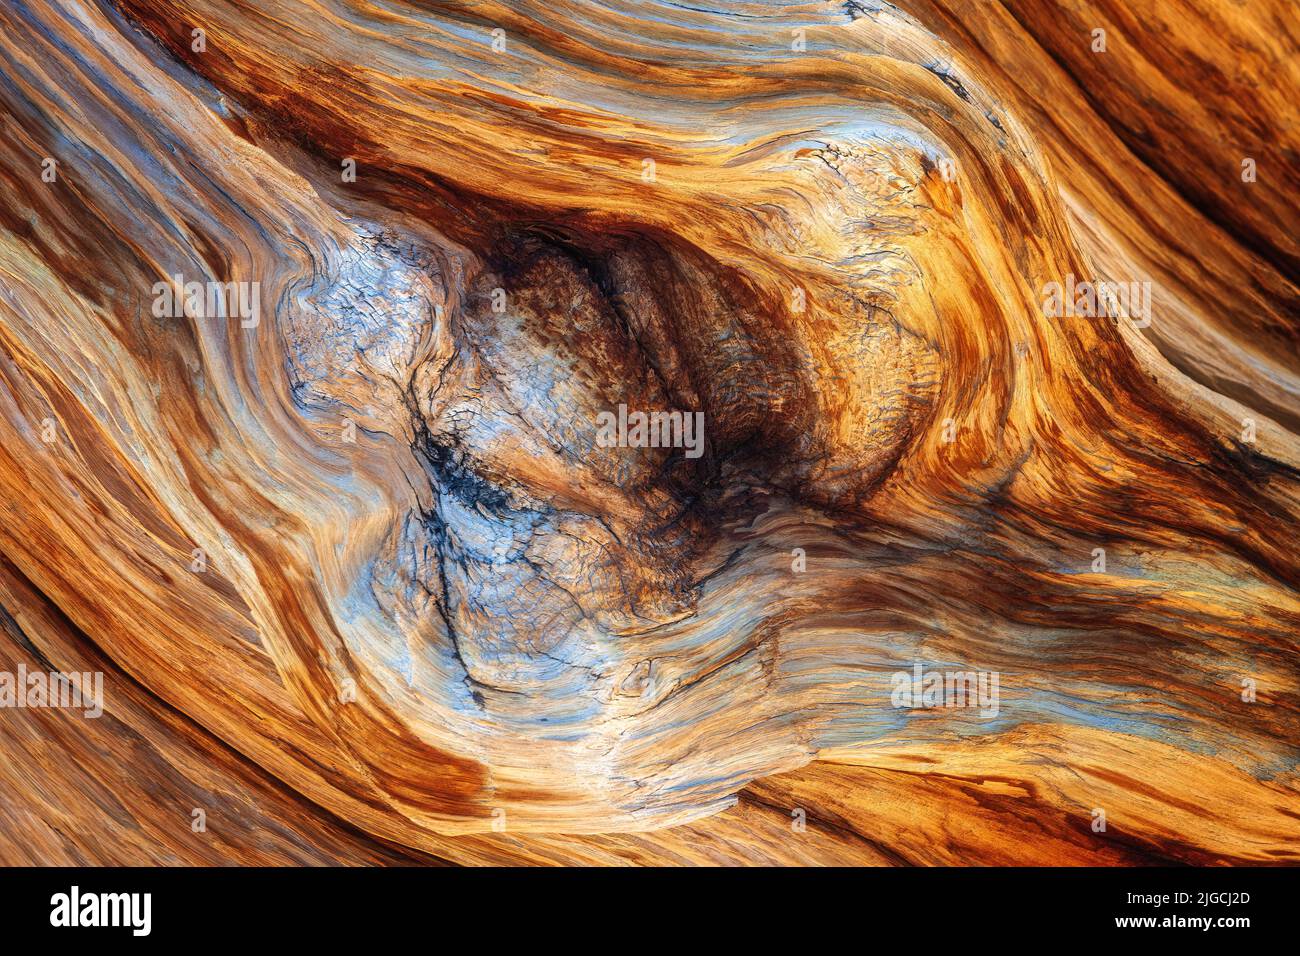 Here is a wood abstract of an ancient bristlecone tree found up in the White Mountains of California. These trees are some four thousand years old. Stock Photo